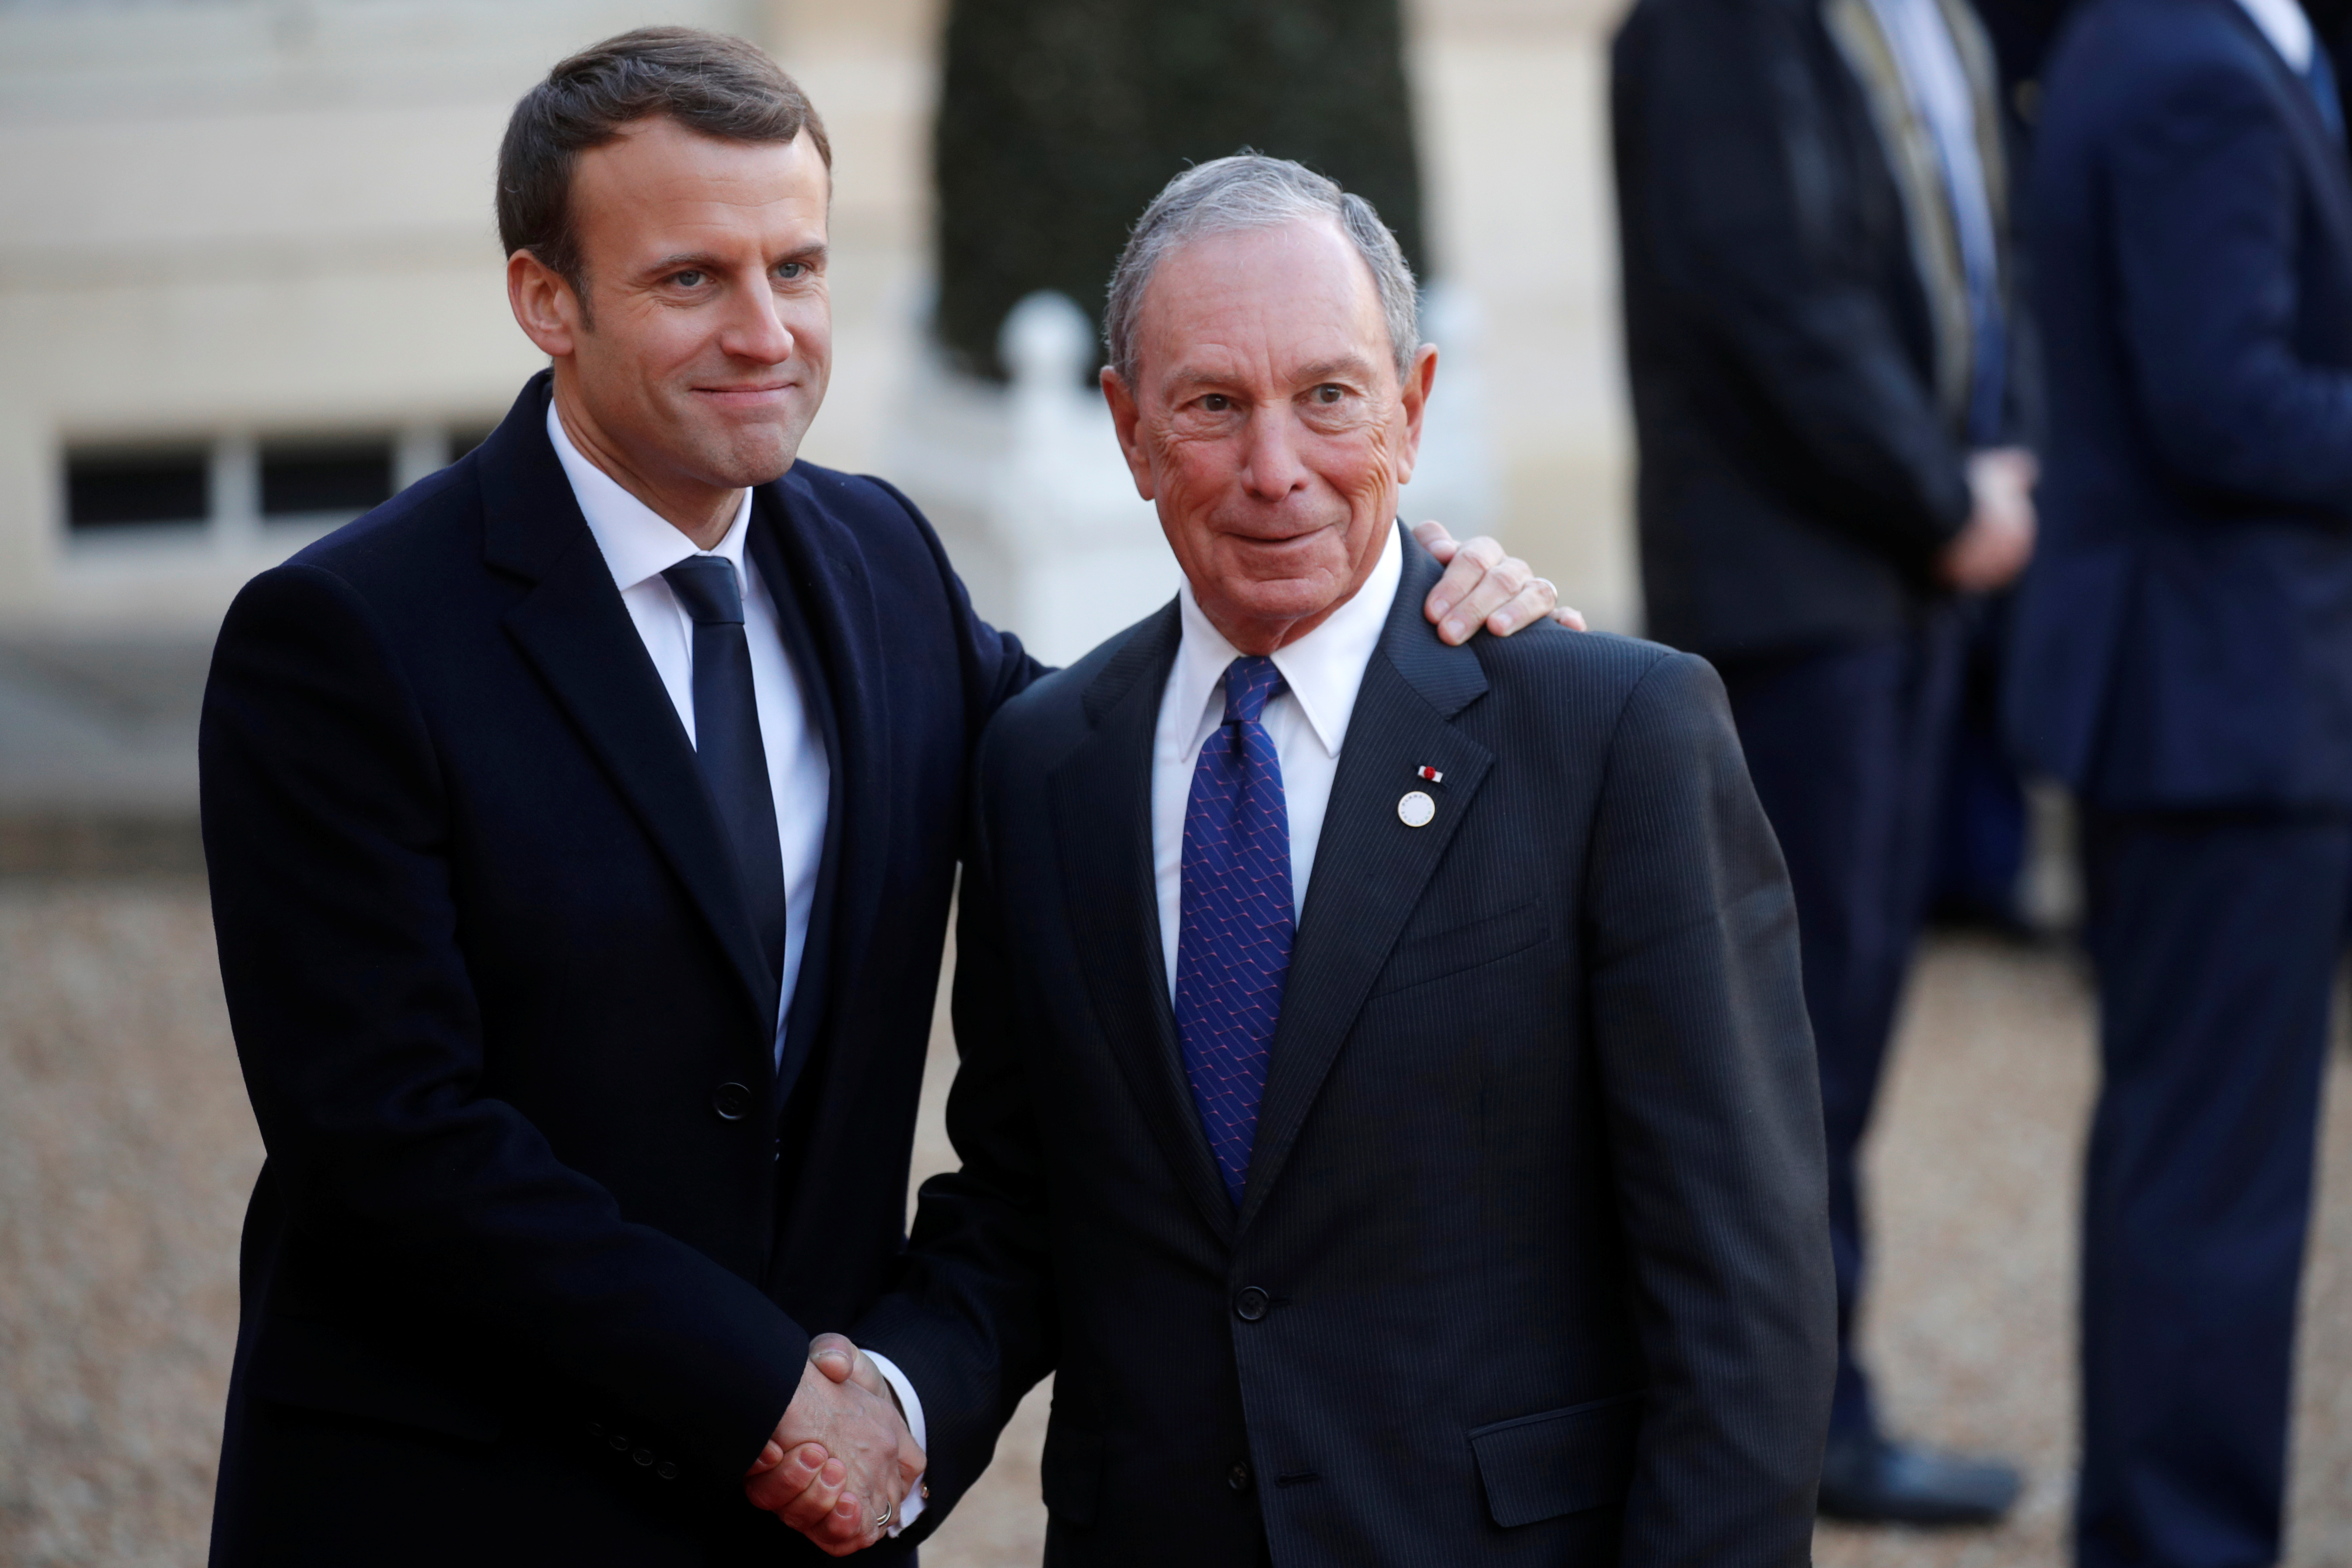 French President Emmanuel Macron welcomes Special envoy to the United Nations for climate change Michael Bloomberg as he arrives for a lunch at the Elysee Palace as part of the One Planet Summit in Paris